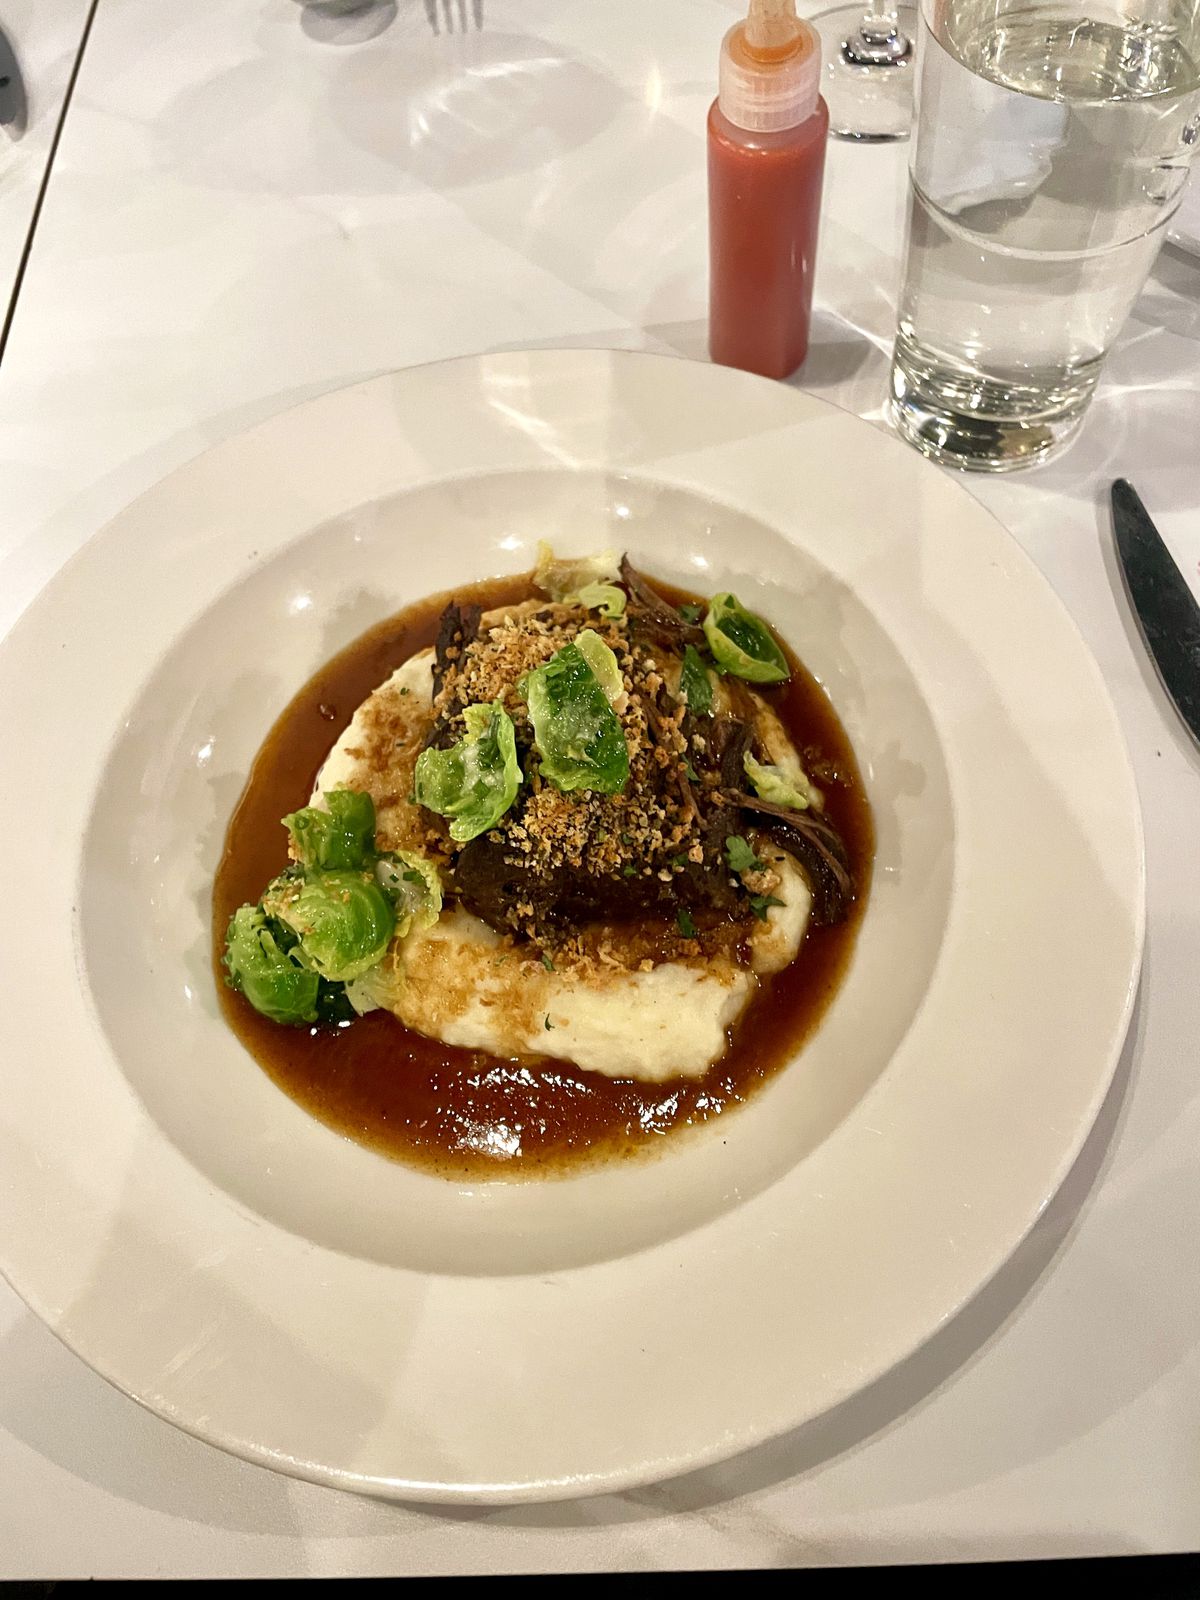 Beef short ribs sit in a bowl atop mashed potatoes. It is sprinkled with Brussels sprouts. A glass of water and a container of hot sauce sit at the top.